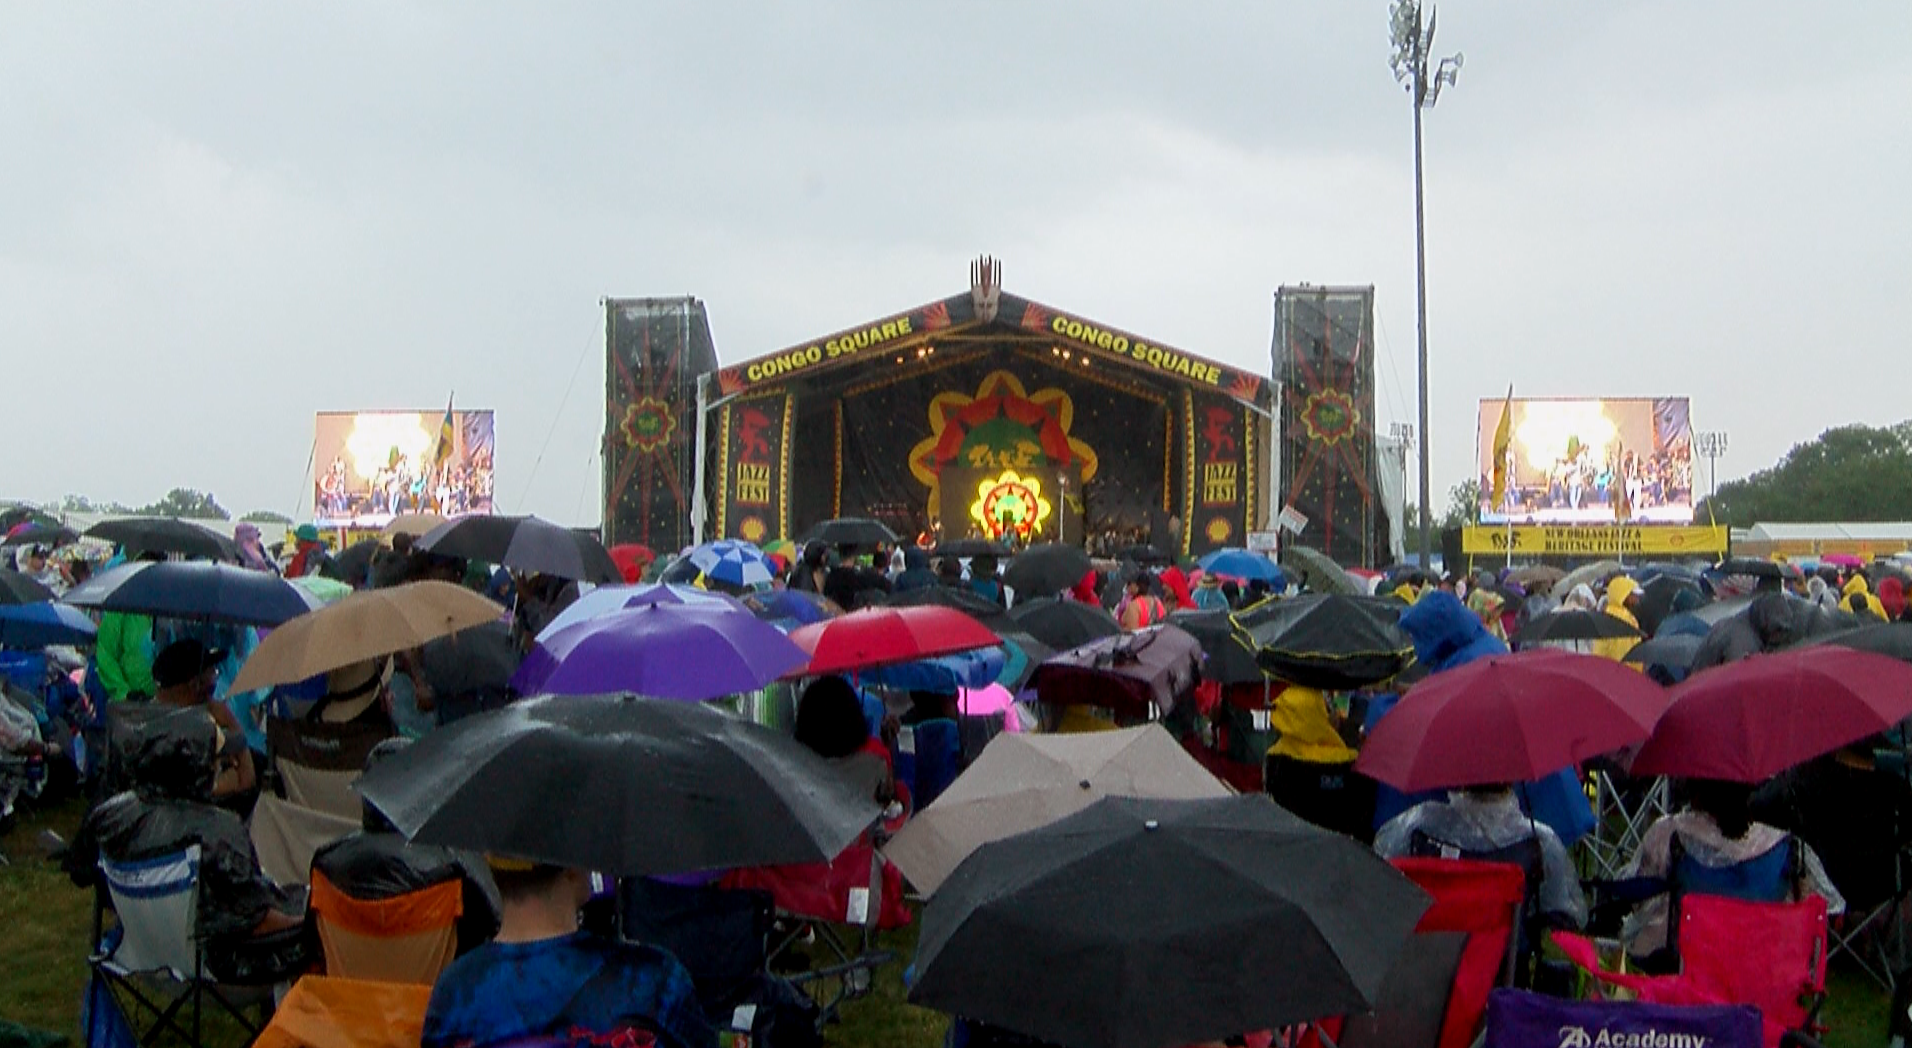 What not to wear to Jazz Fest - and what you should, Louisiana Festivals